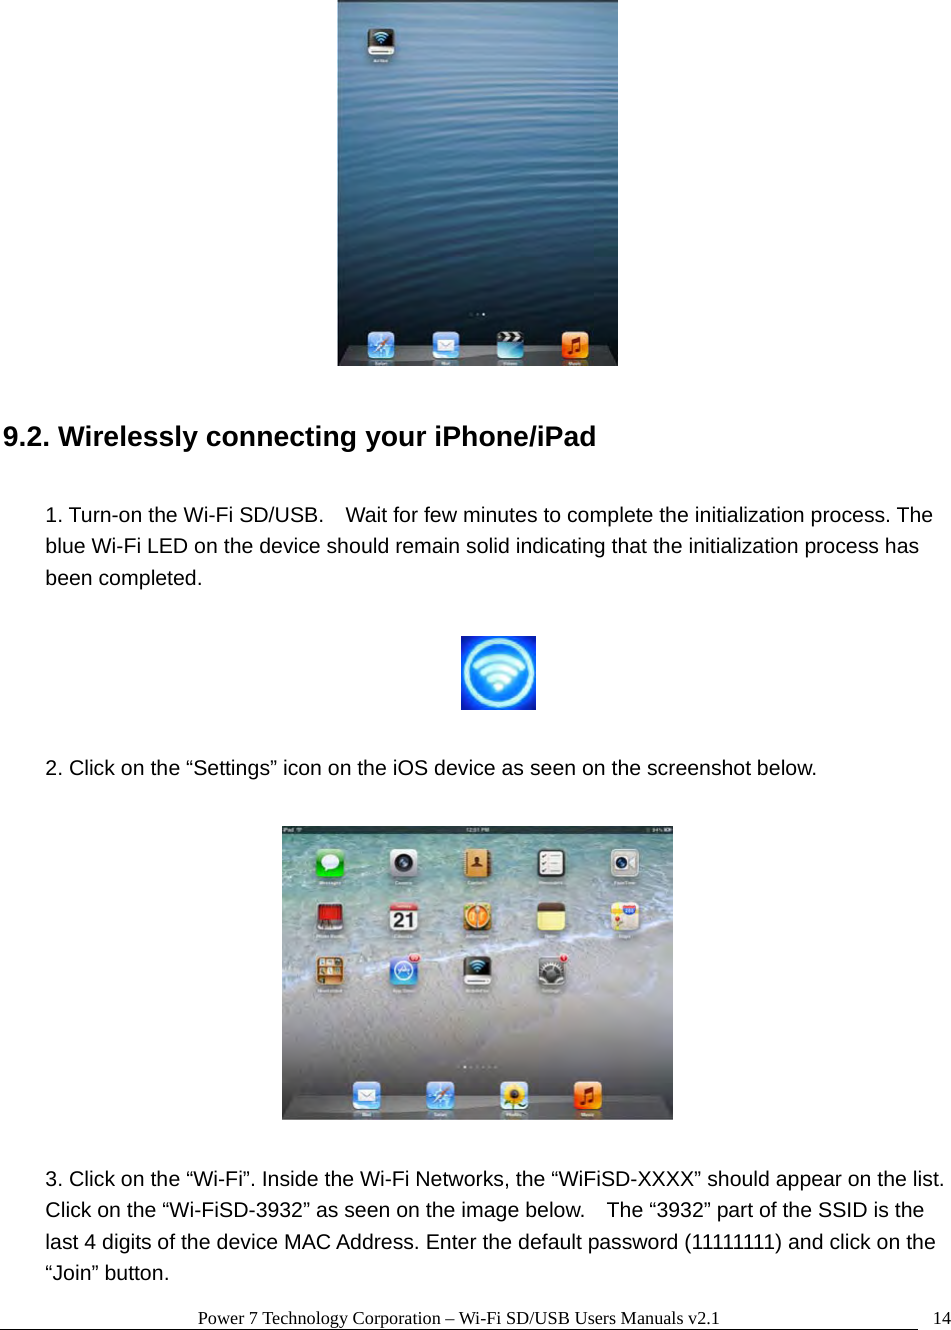 Power 7 Technology Corporation – Wi-Fi SD/USB Users Manuals v2.1  14  9.2. Wirelessly connecting your iPhone/iPad  1. Turn-on the Wi-Fi SD/USB.    Wait for few minutes to complete the initialization process. The blue Wi-Fi LED on the device should remain solid indicating that the initialization process has been completed.    2. Click on the “Settings” icon on the iOS device as seen on the screenshot below.    3. Click on the “Wi-Fi”. Inside the Wi-Fi Networks, the “WiFiSD-XXXX” should appear on the list.   Click on the “Wi-FiSD-3932” as seen on the image below.    The “3932” part of the SSID is the last 4 digits of the device MAC Address. Enter the default password (11111111) and click on the “Join” button. 